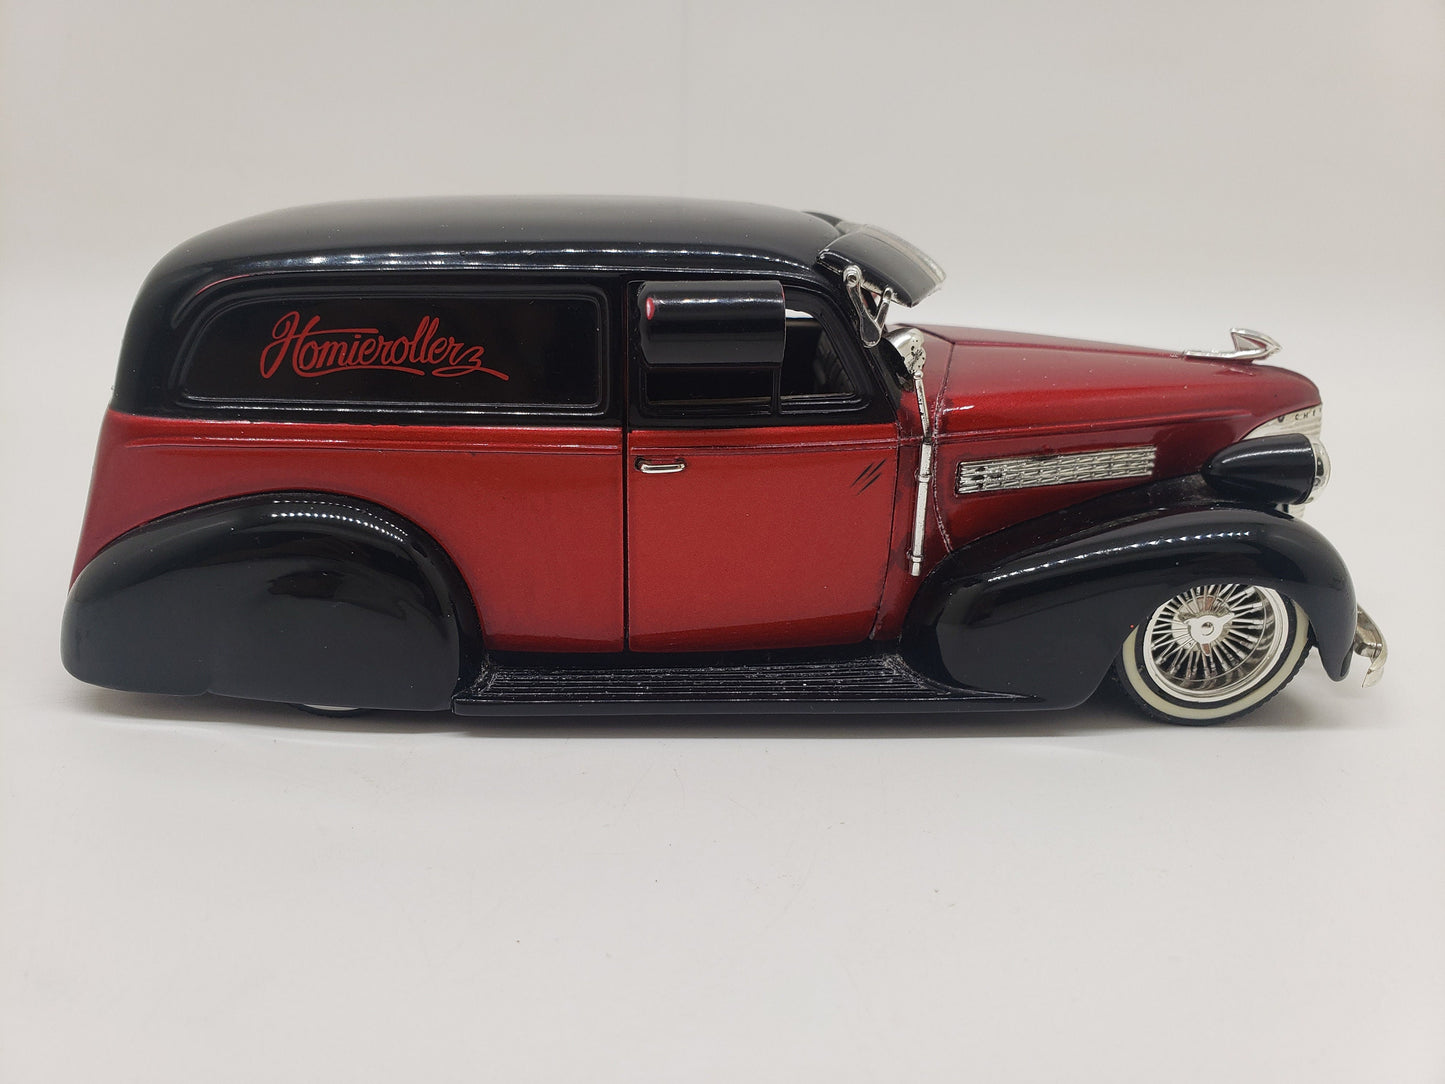 Homie Rollerz 39' Chevy Delivery Dark Red Jada Toys Collectible 1:24 Scale Model Toy Car